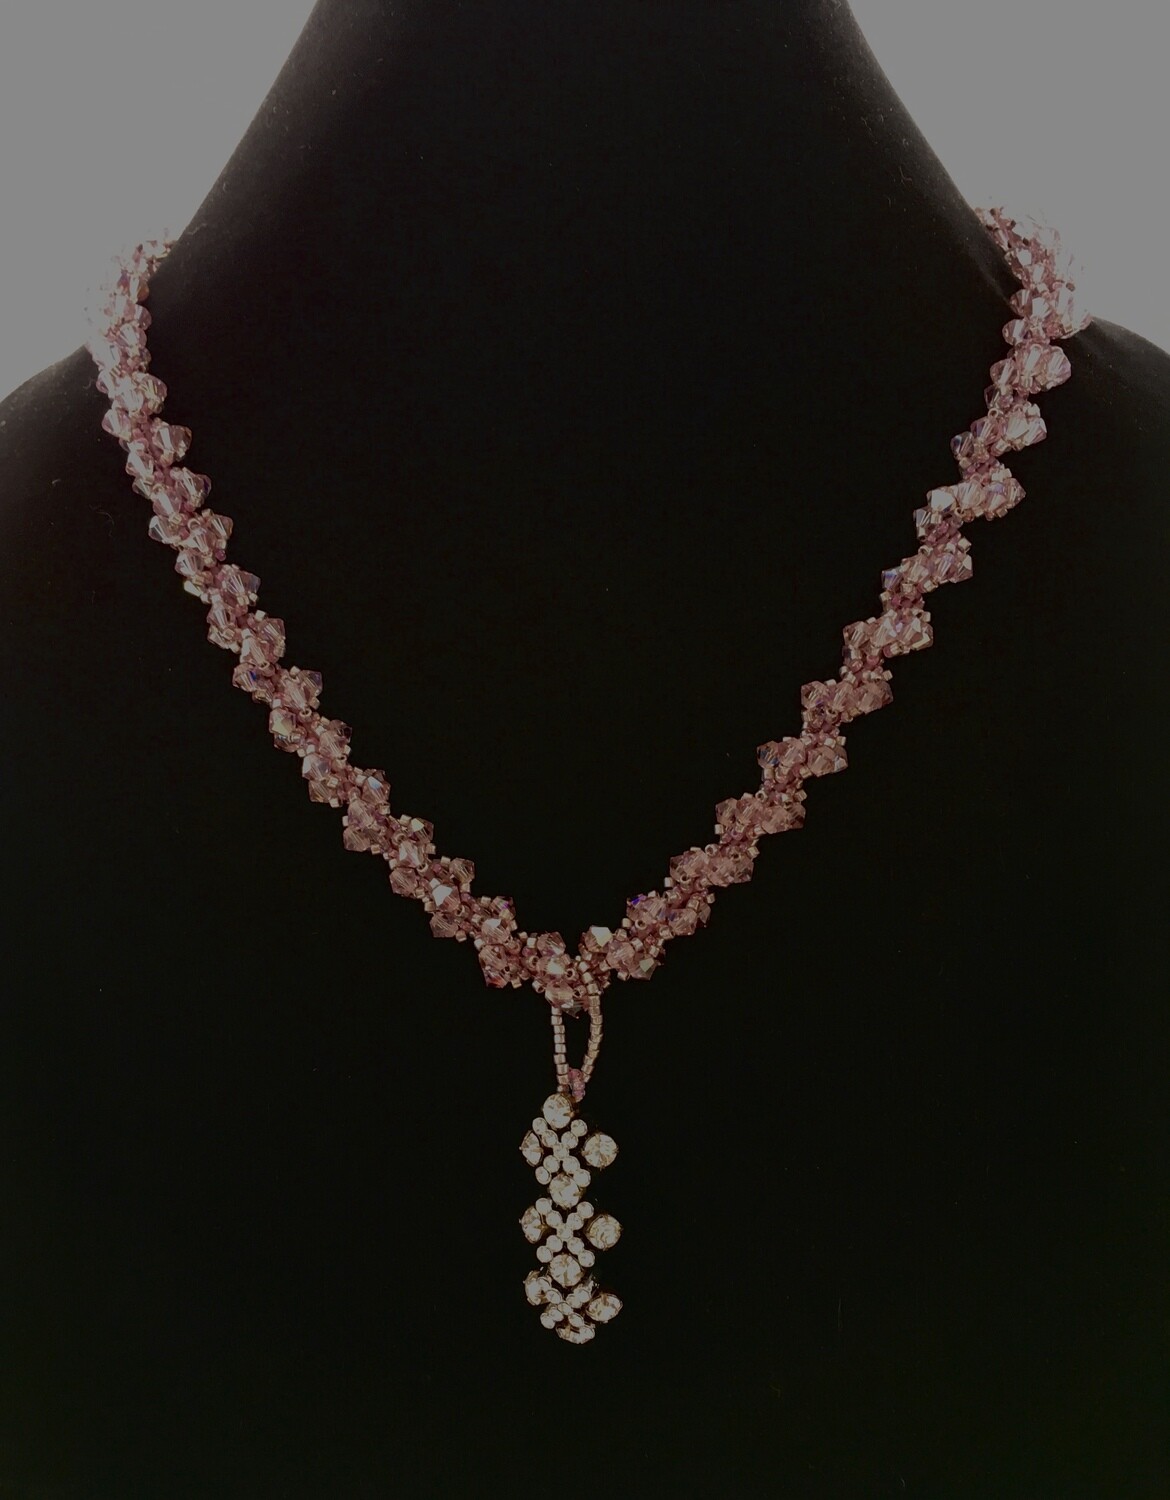 Mauve twisted necklace with crystal pendant